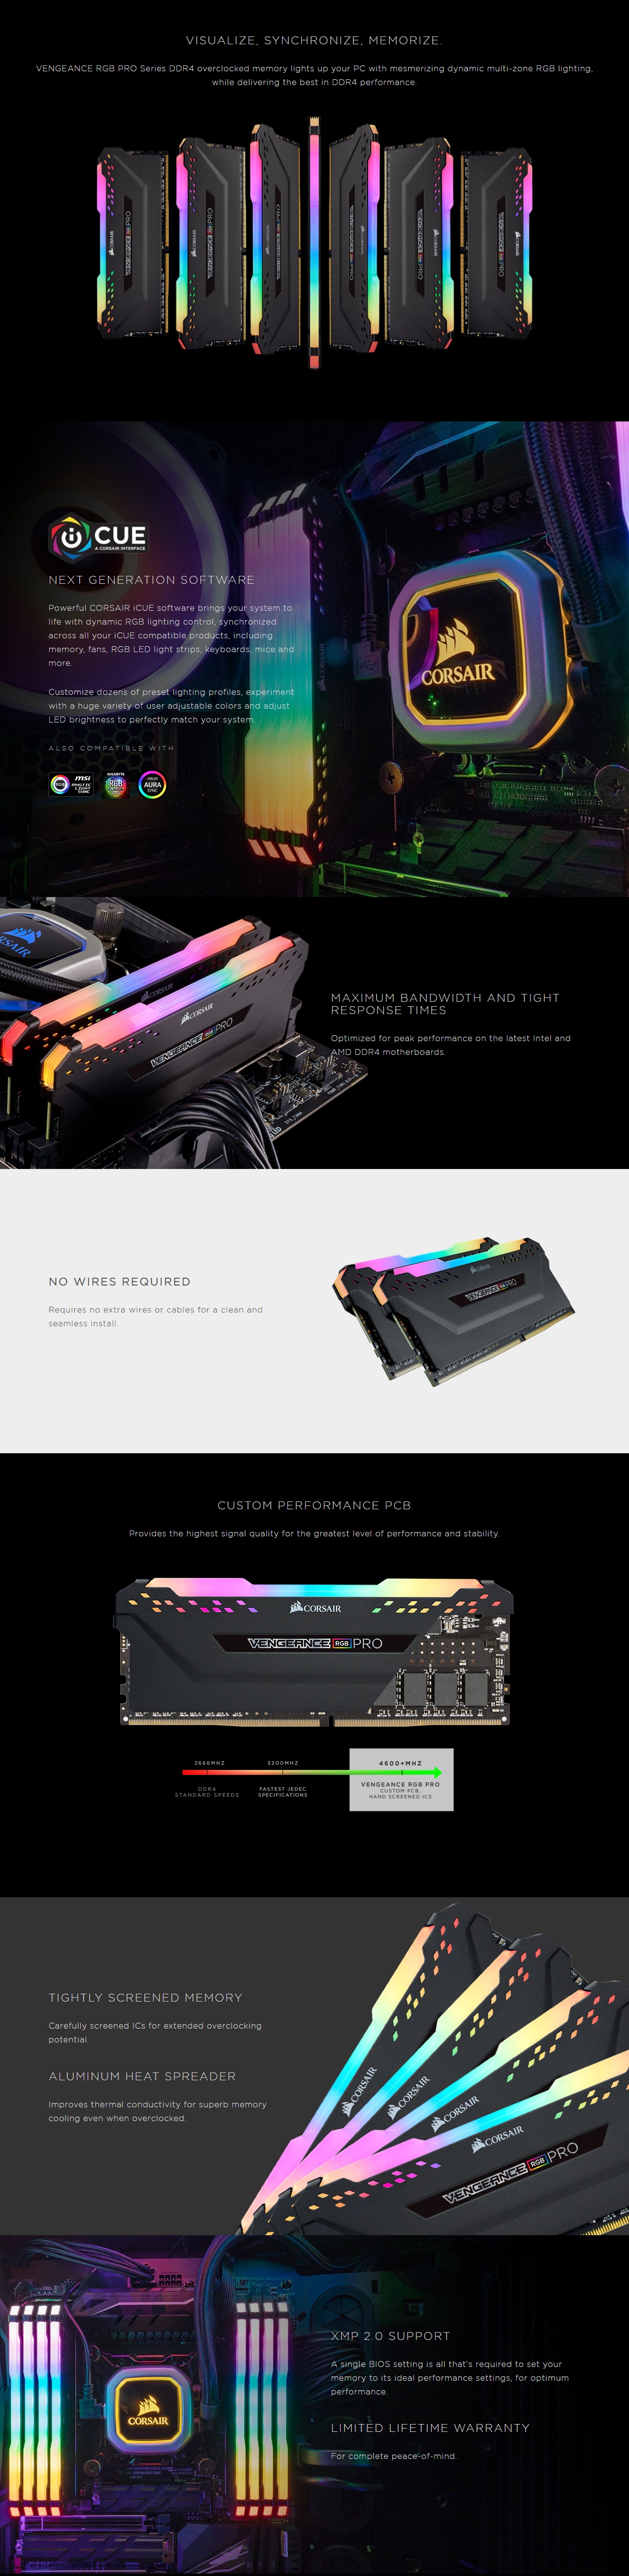 A large marketing image providing additional information about the product Corsair 32GB Kit (2x16GB) DDR4 Vengeance RGB Pro C18 3600MHz Ryzen Optimized - Black - Additional alt info not provided